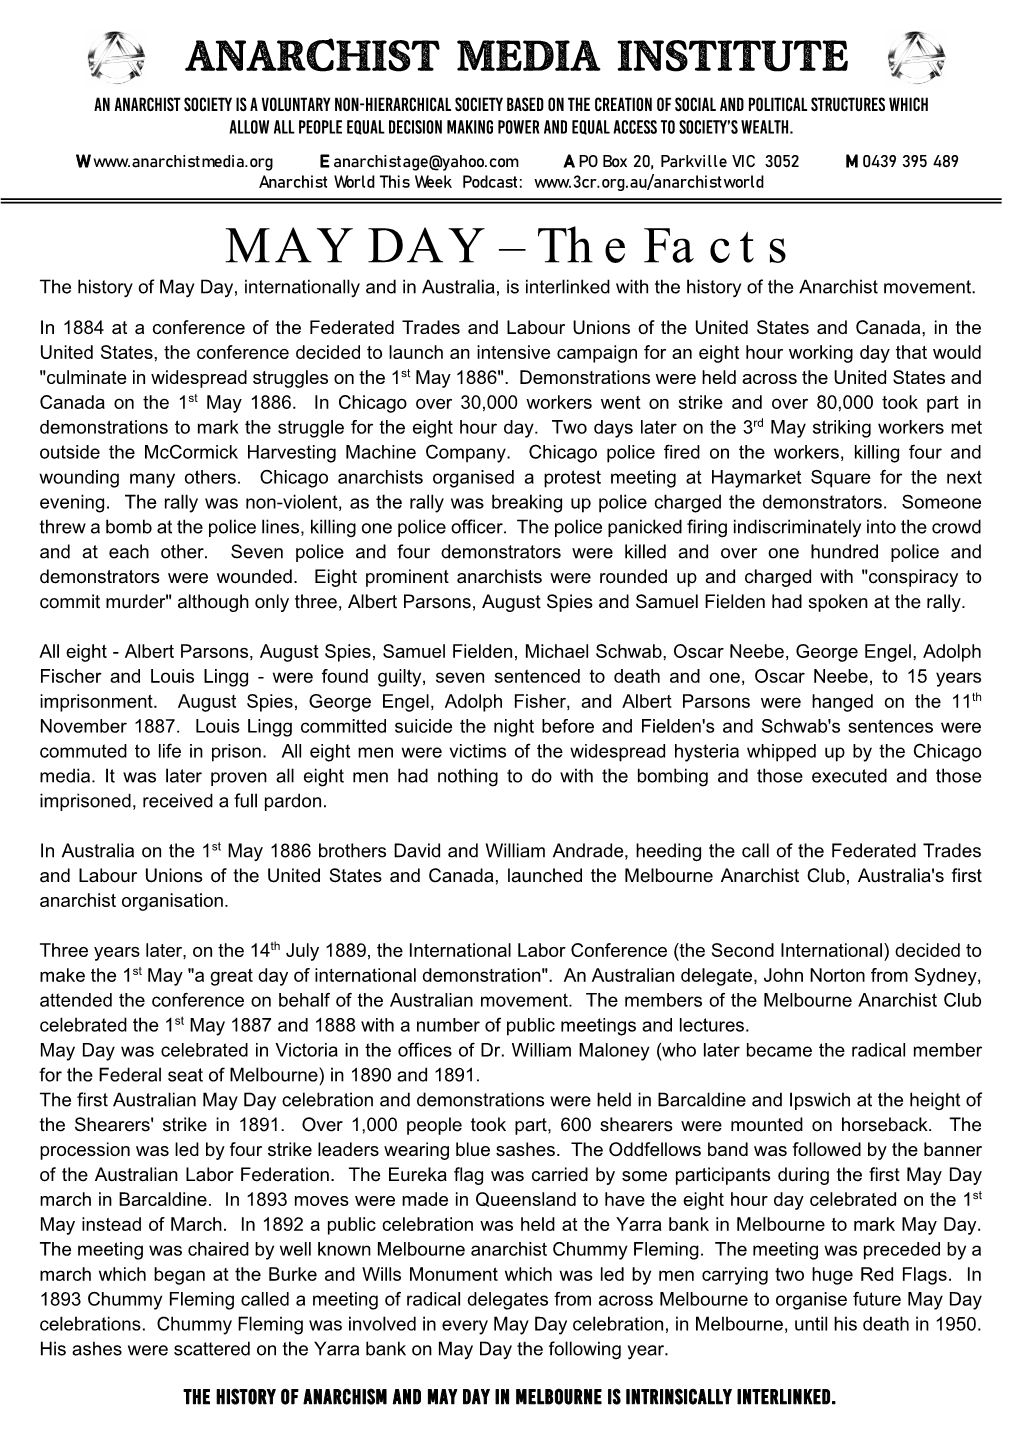 MAY DAY – the Facts the History of May Day, Internationally and in Australia, Is Interlinked with the History of the Anarchist Movement